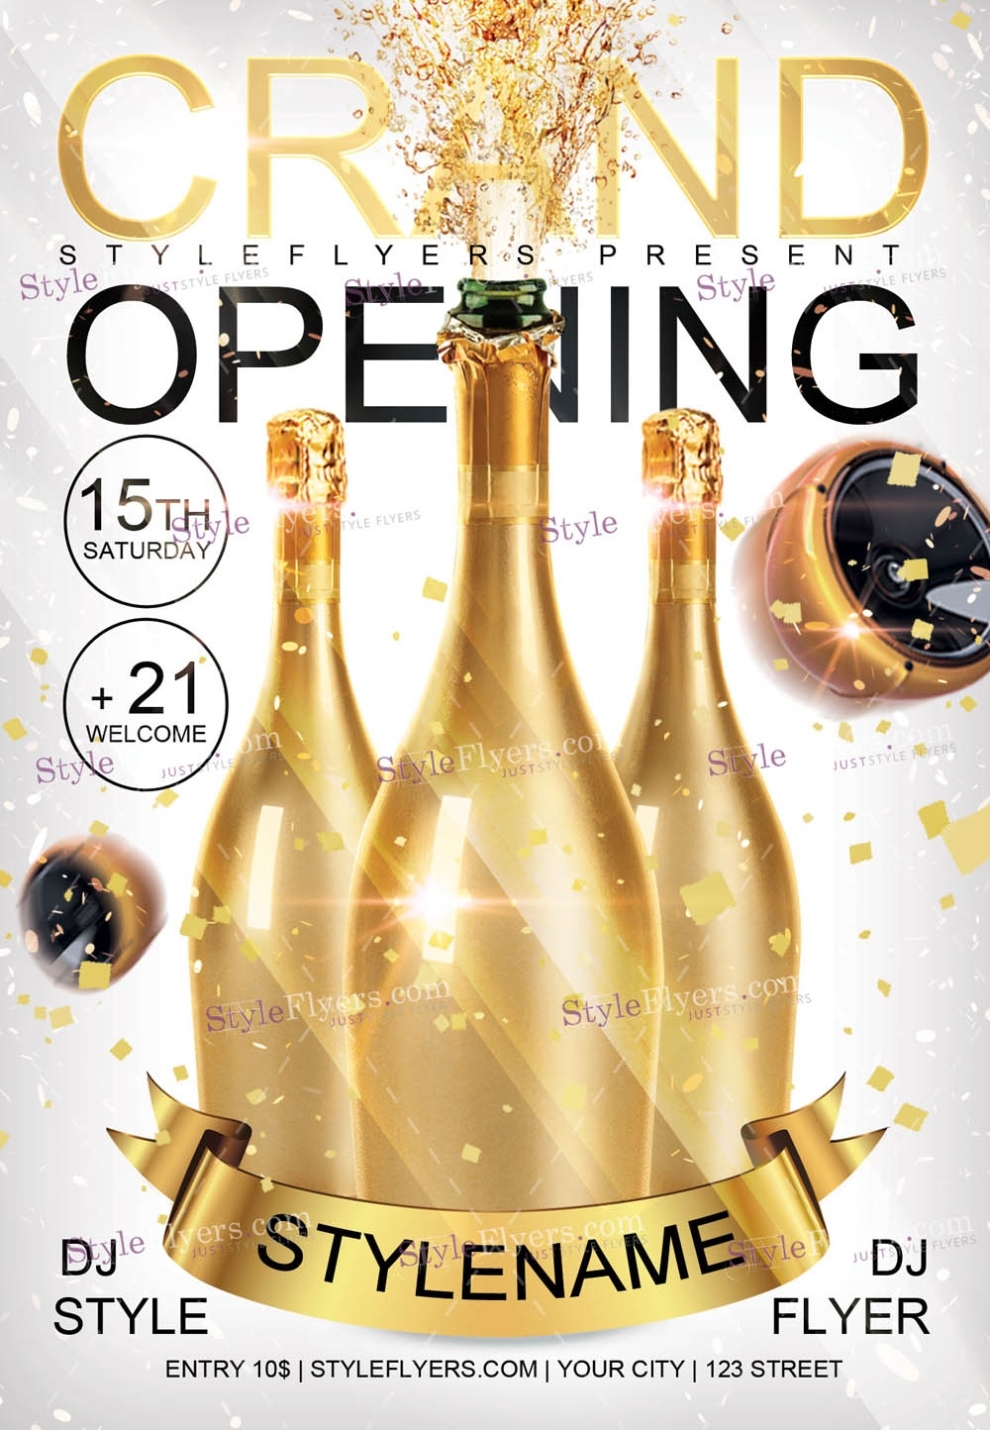 19 Free And Premium Flyers For Your Winter Event - Graphicsfuel With Grand Opening Flyer Template Free